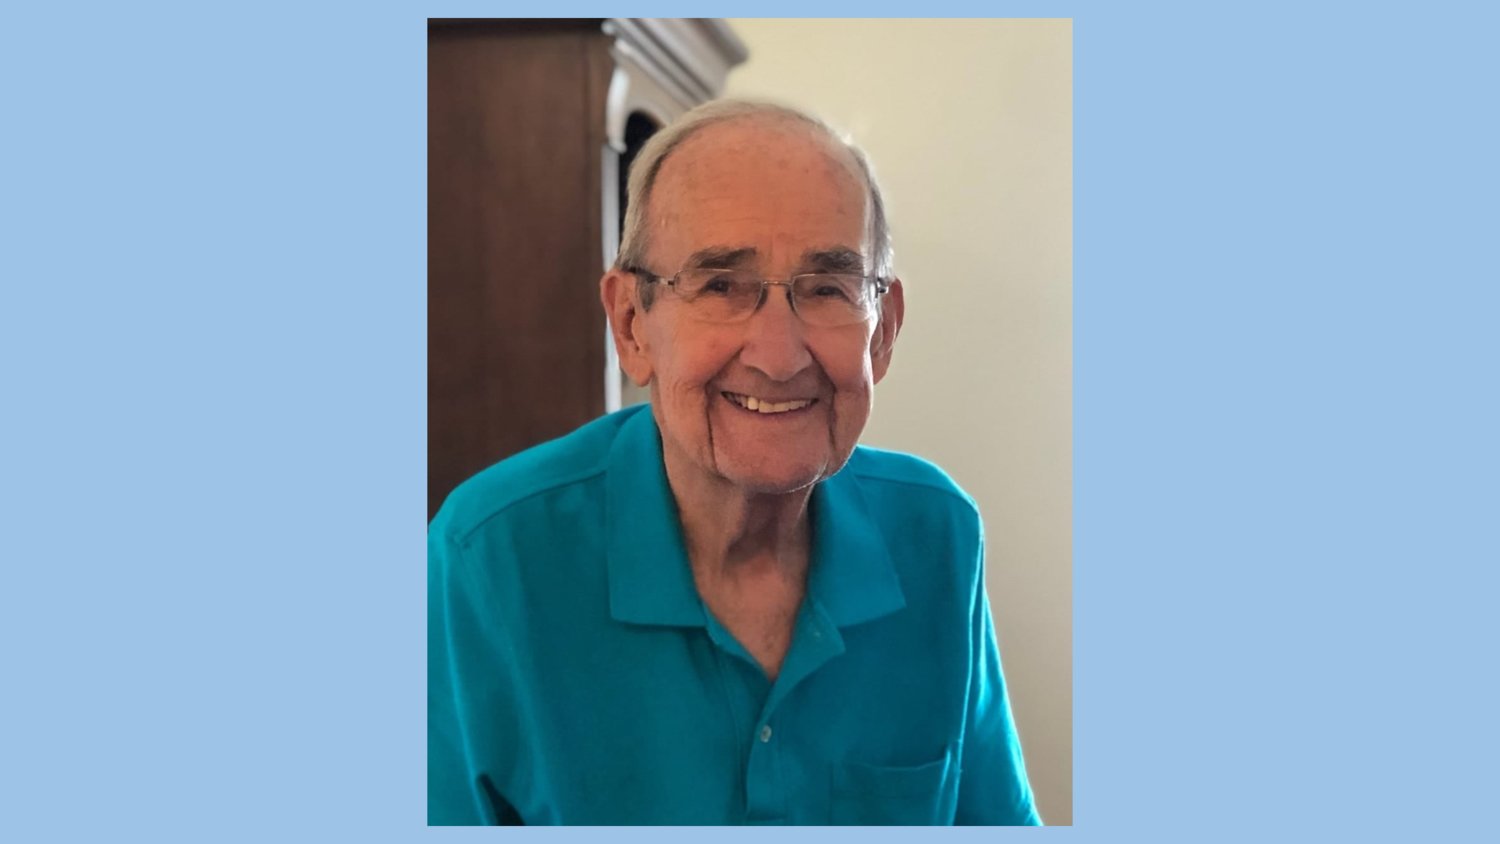 Korean War veteran, insurance professional, husband and father, Hugh C. Gillis passed away Feb. 22. He leaves behind multiple children, nine grandchildren, three great-grandchildren and many other loved ones. He is deeply missed.